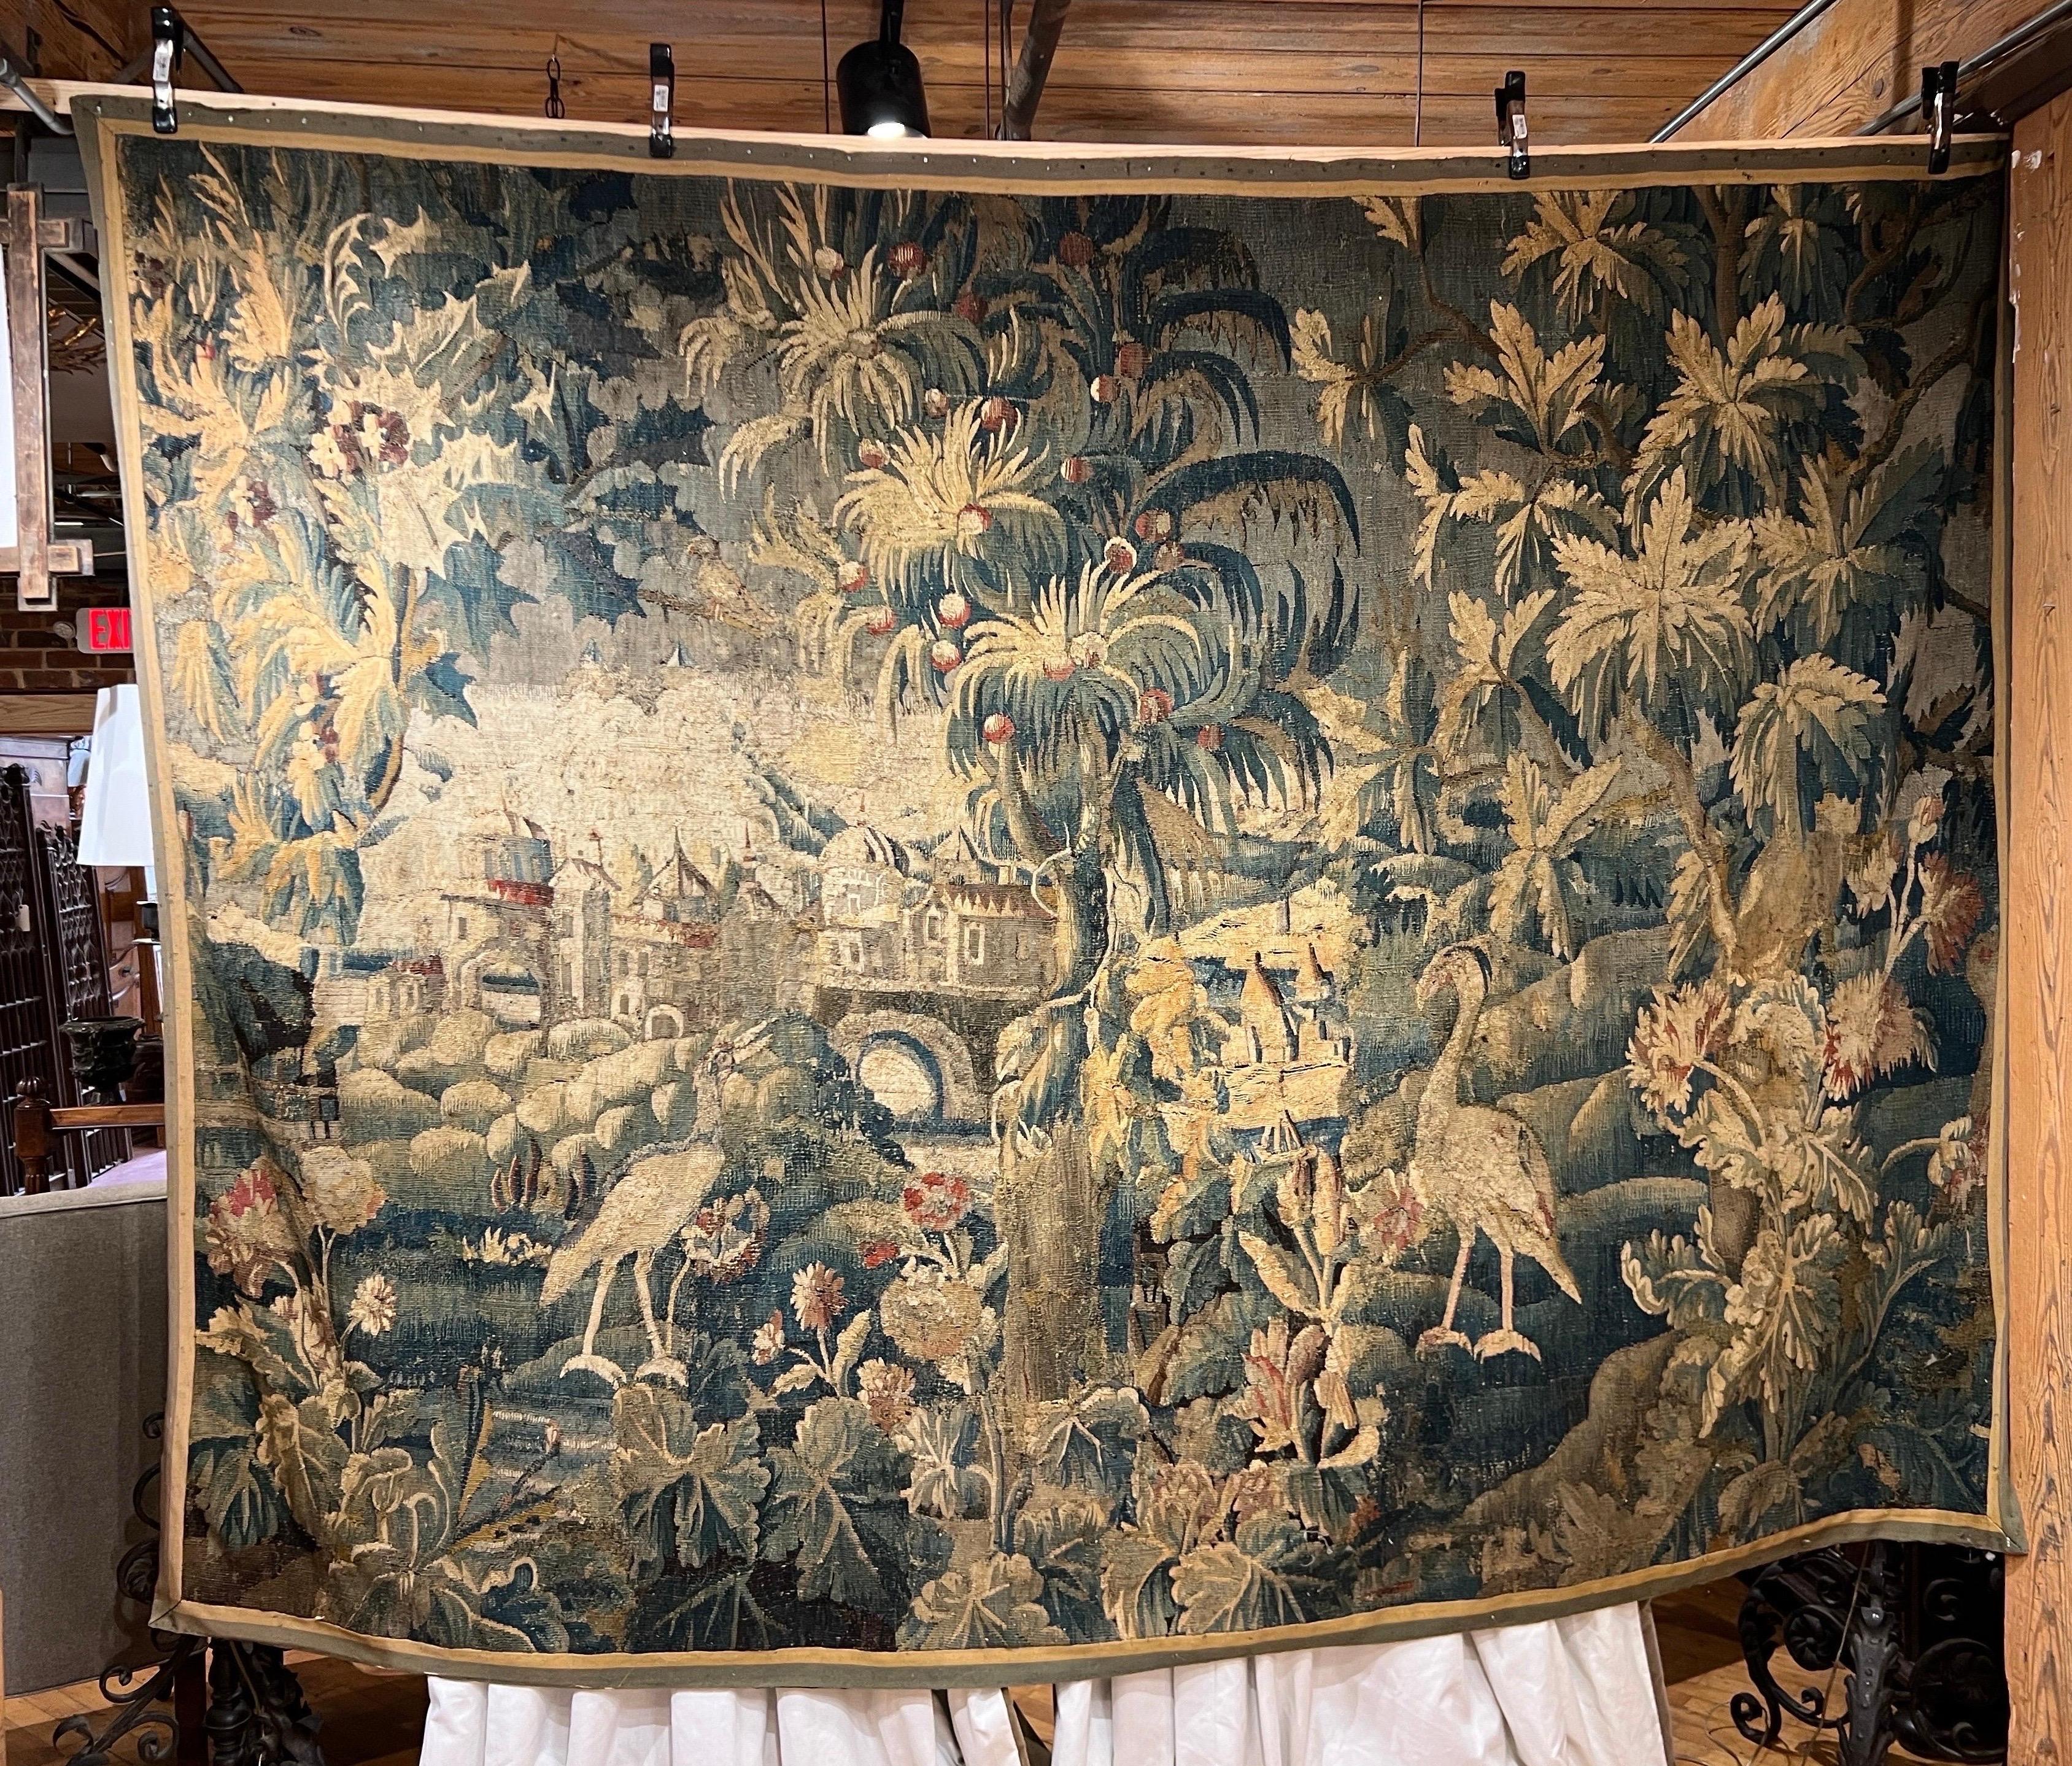 Incredible size and scale of this 17th-18th Century Aubusson tapestry city scape.  Beautifully done with cranes, foilage, trees, river and town in the background. As picturesque as it gets. The tapestry has had a backing added to help preserve this